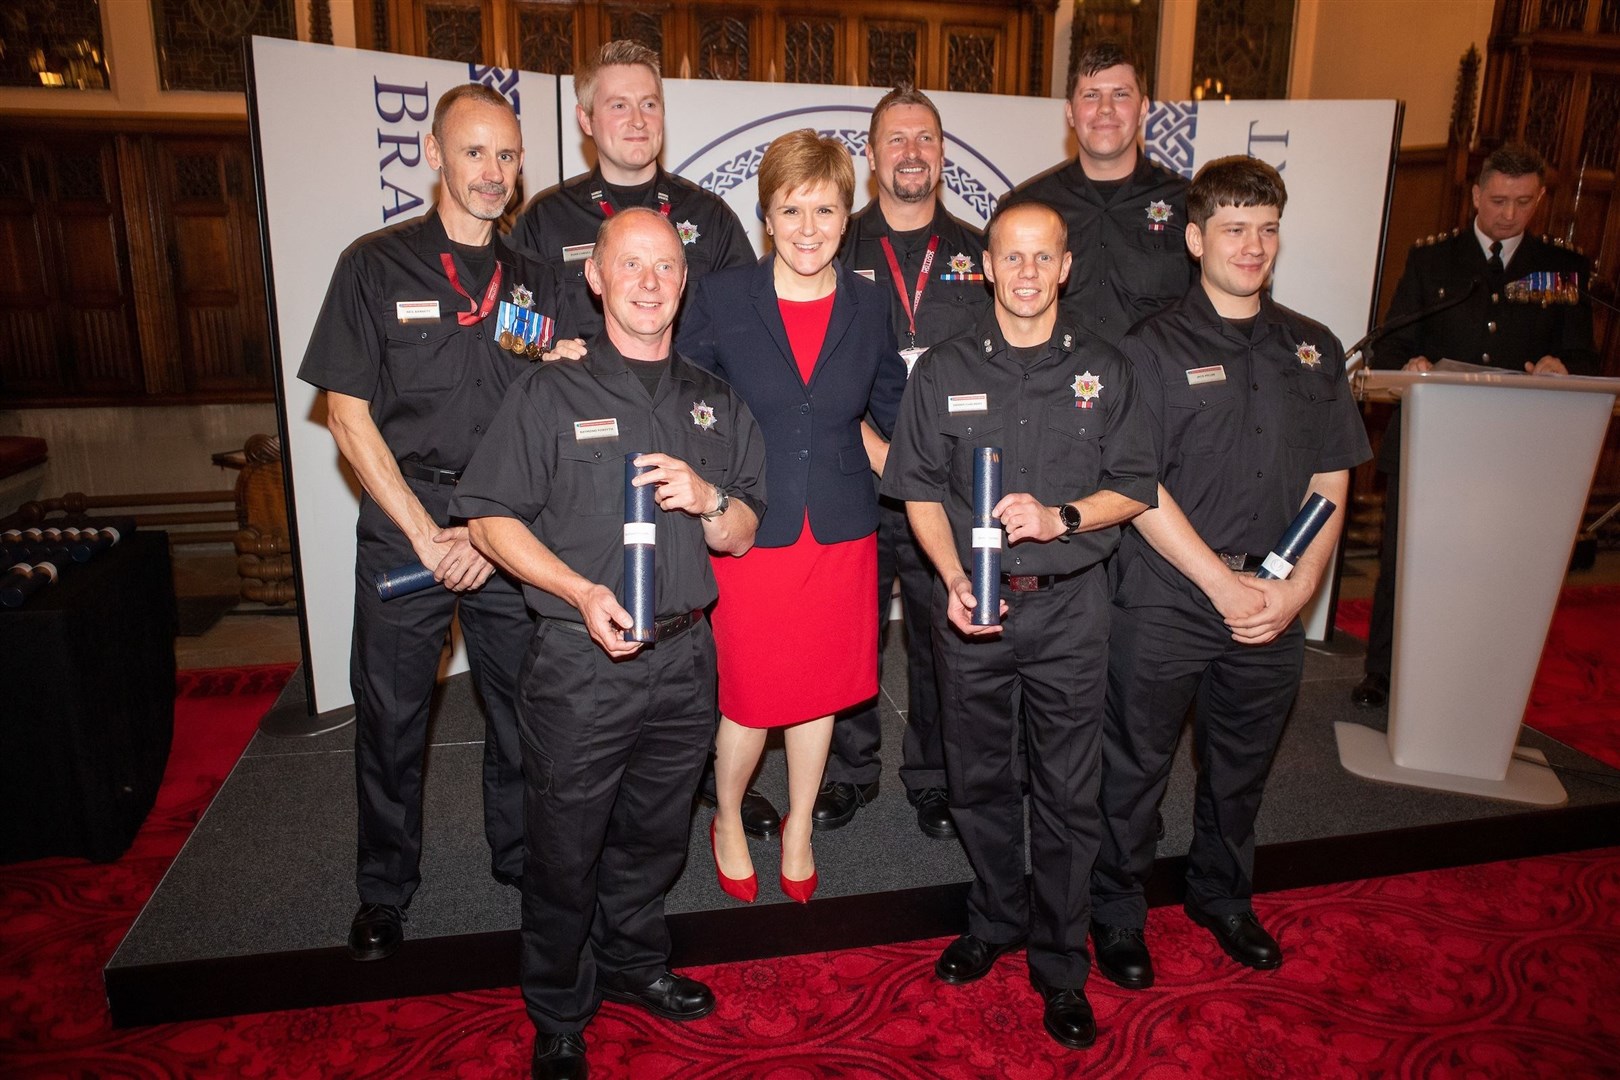 The Aberdeen crew with First Minister Nicola Sturgeon receiving a Brave@Heart award 2019. Picture: Kenny Smith Photography